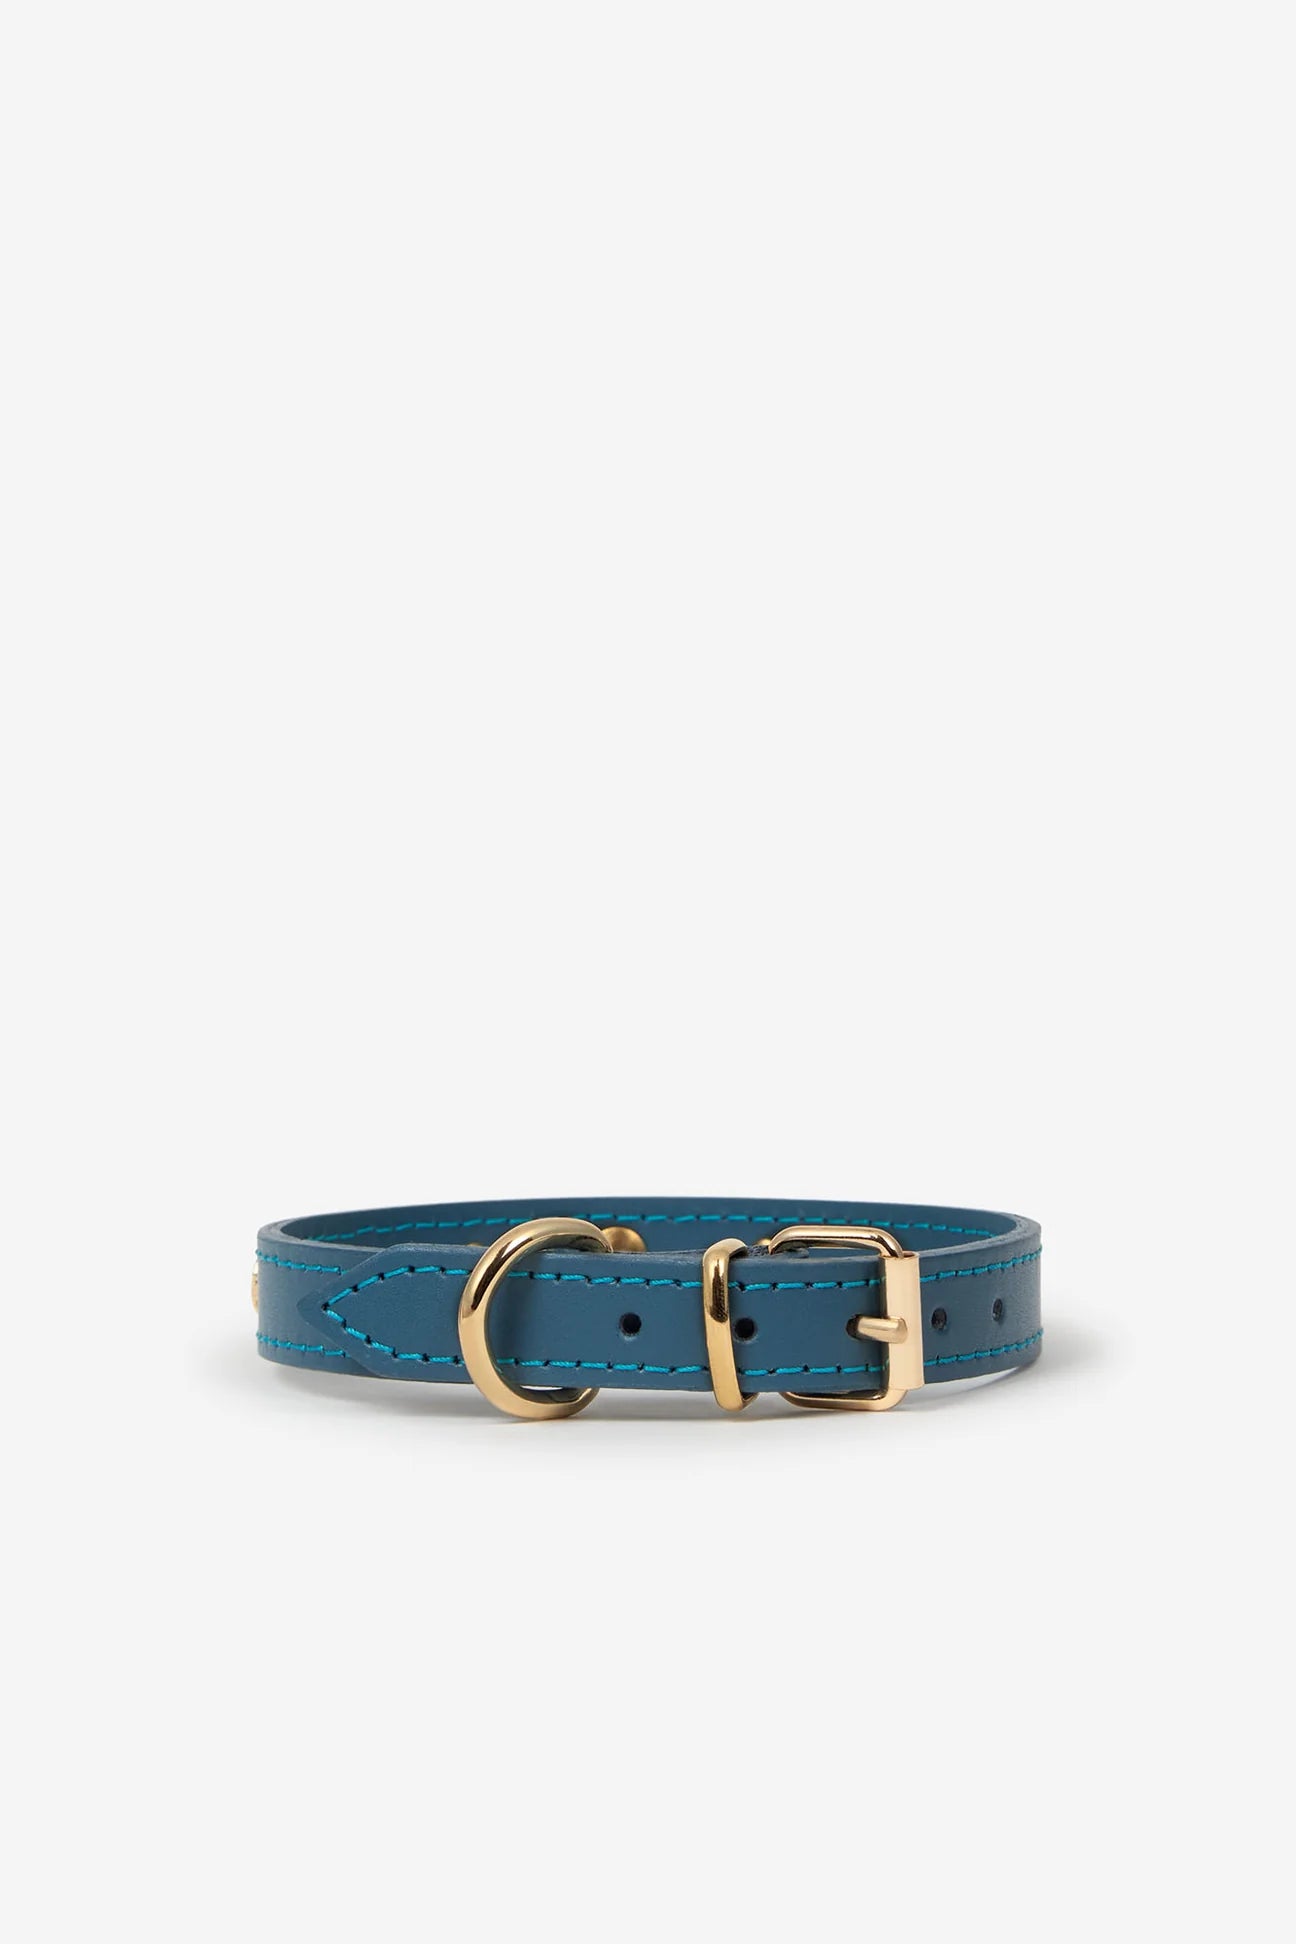 Blue leather dog collar with golden studs